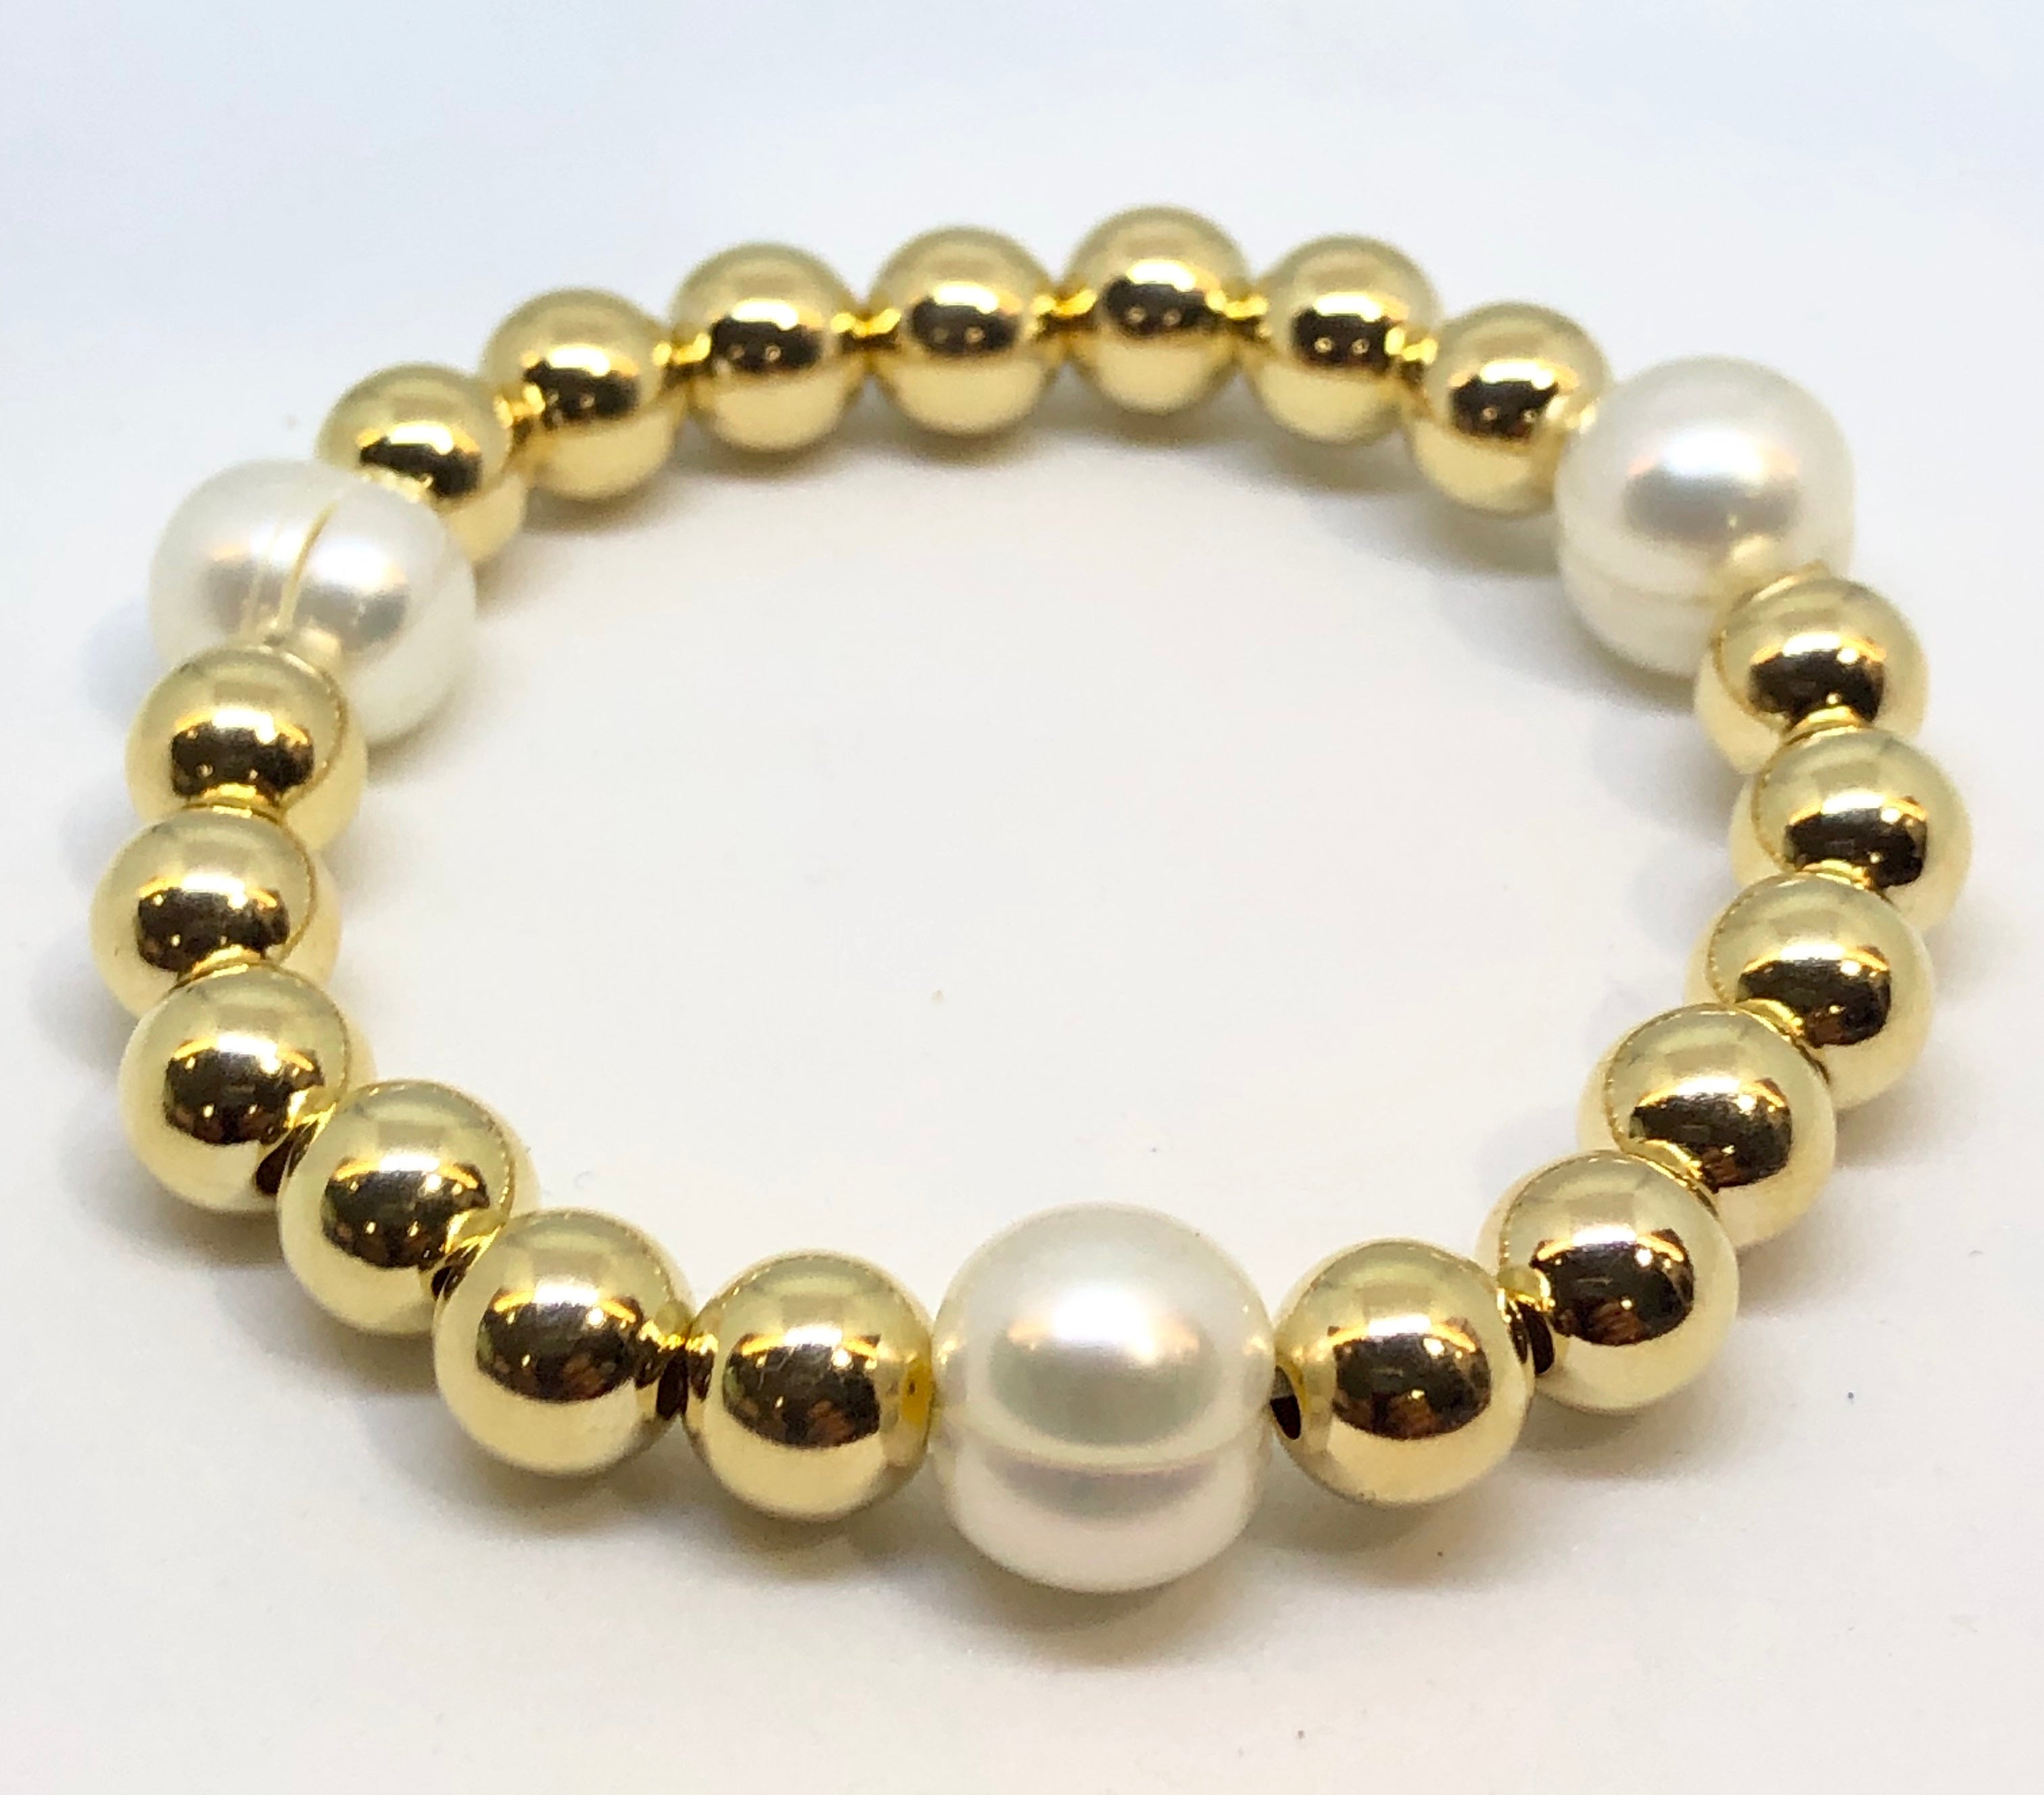 8mm 14kt Gold Filled Bead Bracelet with 3 10mm Fresh Water Pearls